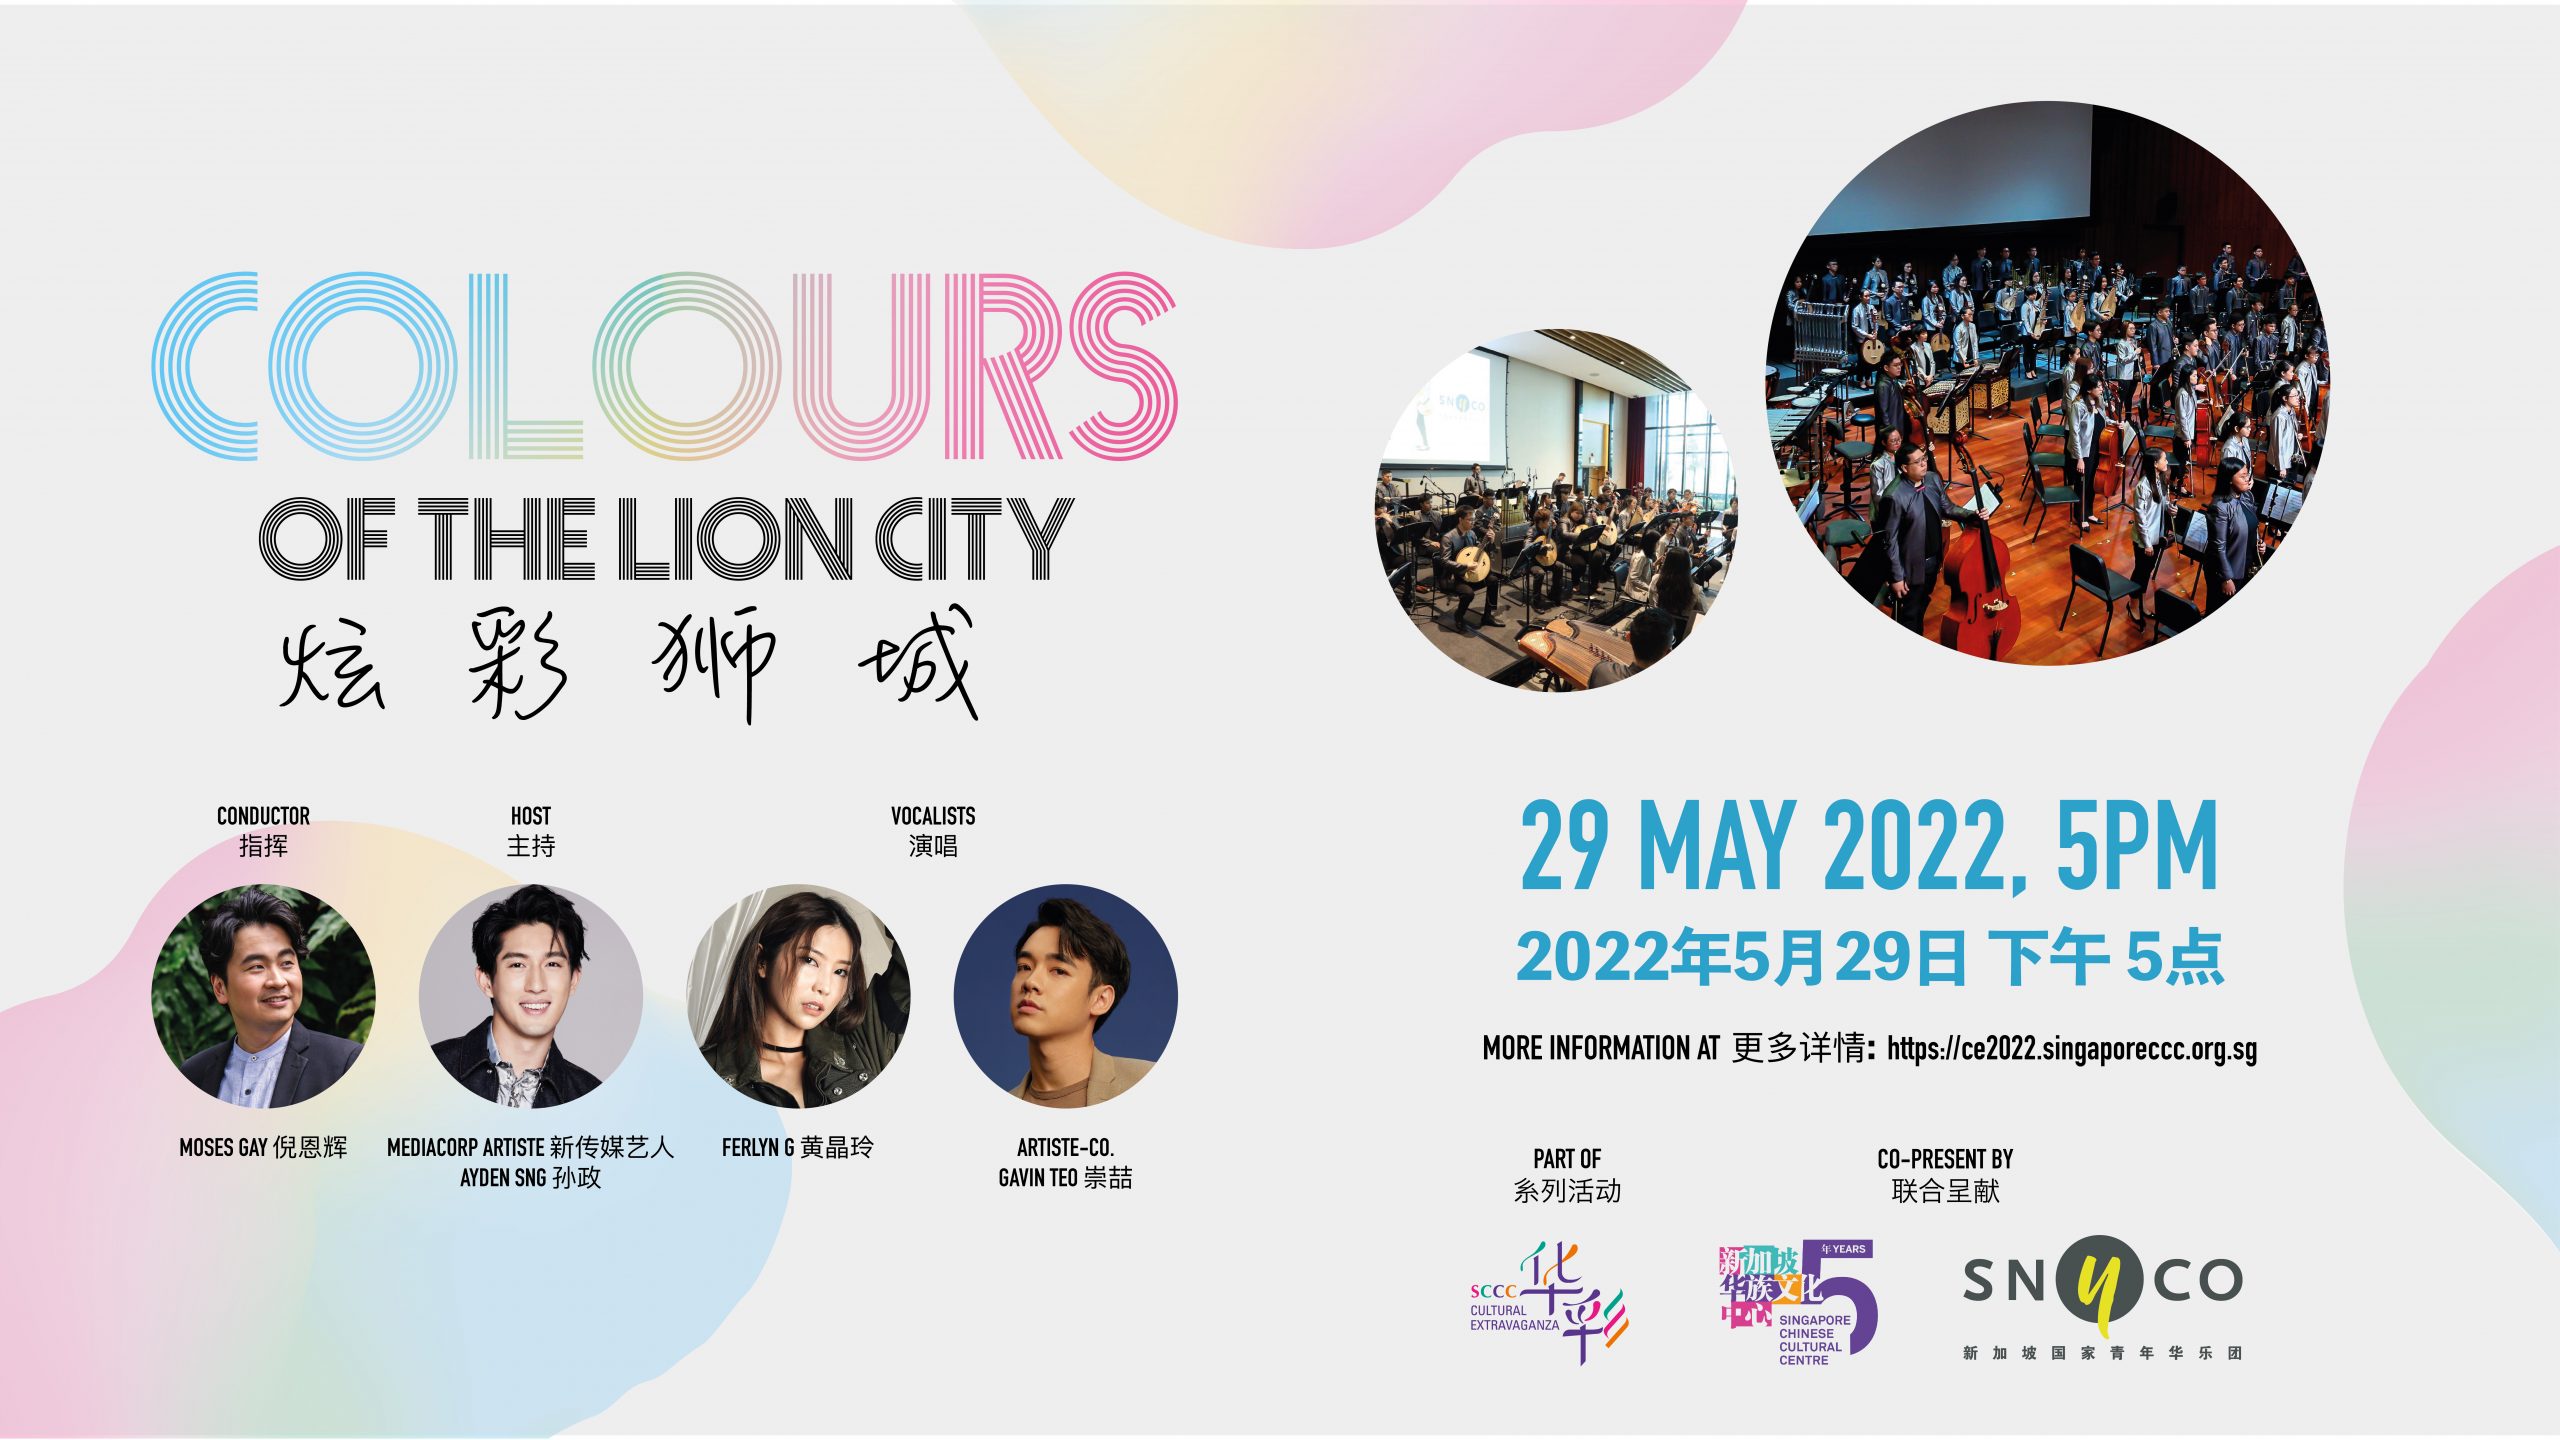 colours-of-the-lion-city-cultural-extravaganza-2022-website-banner